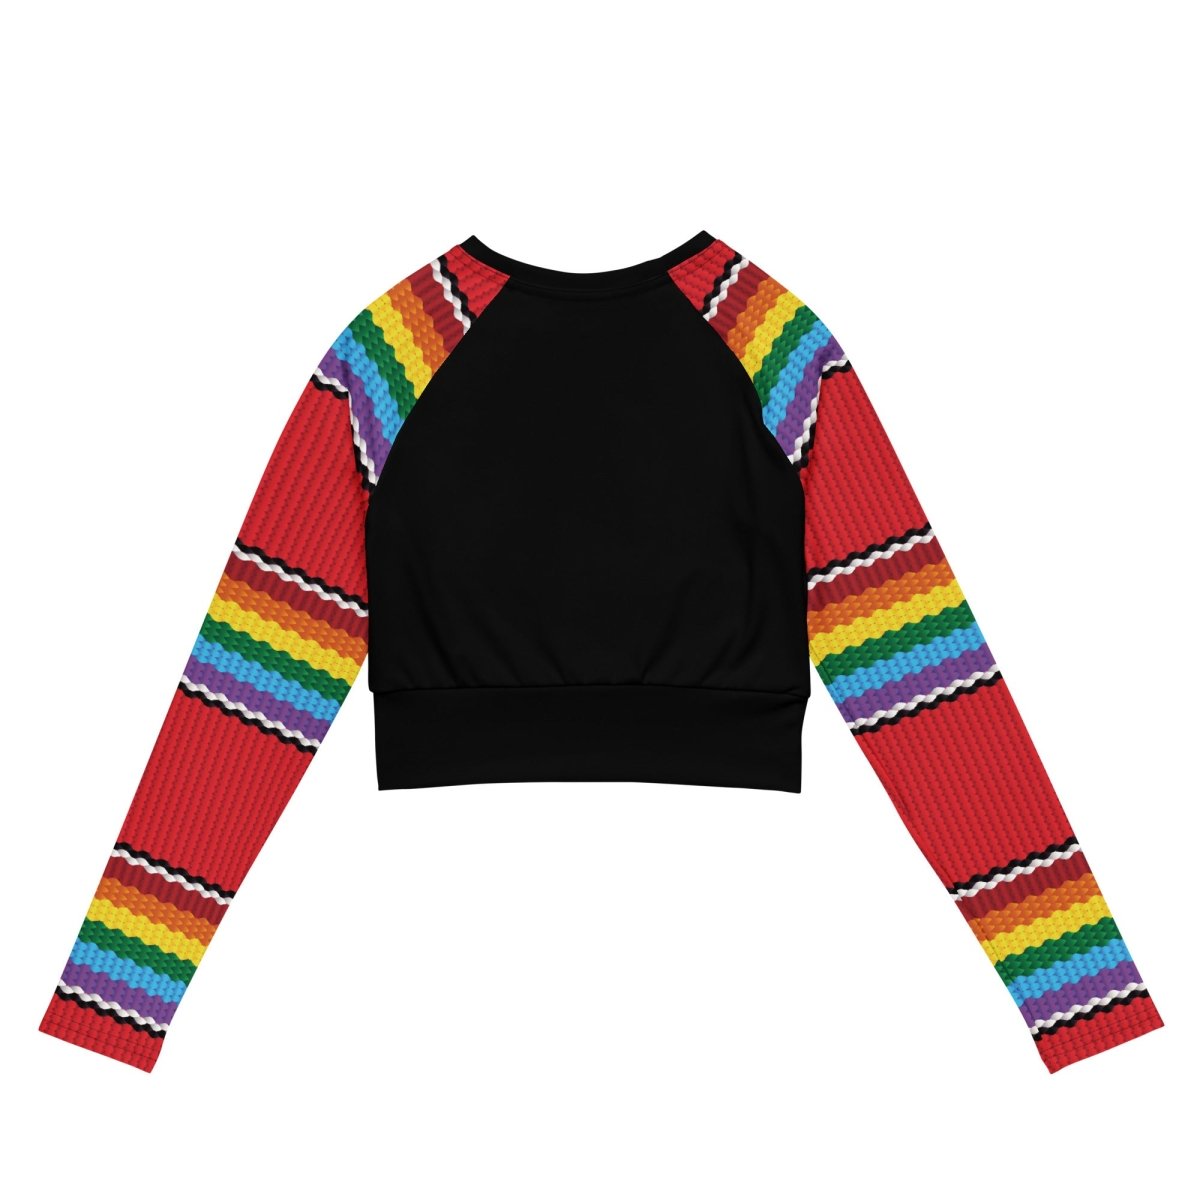 Black Knitted Rainbow Stripe Long Sleeve Crop Top - On Trend Shirts